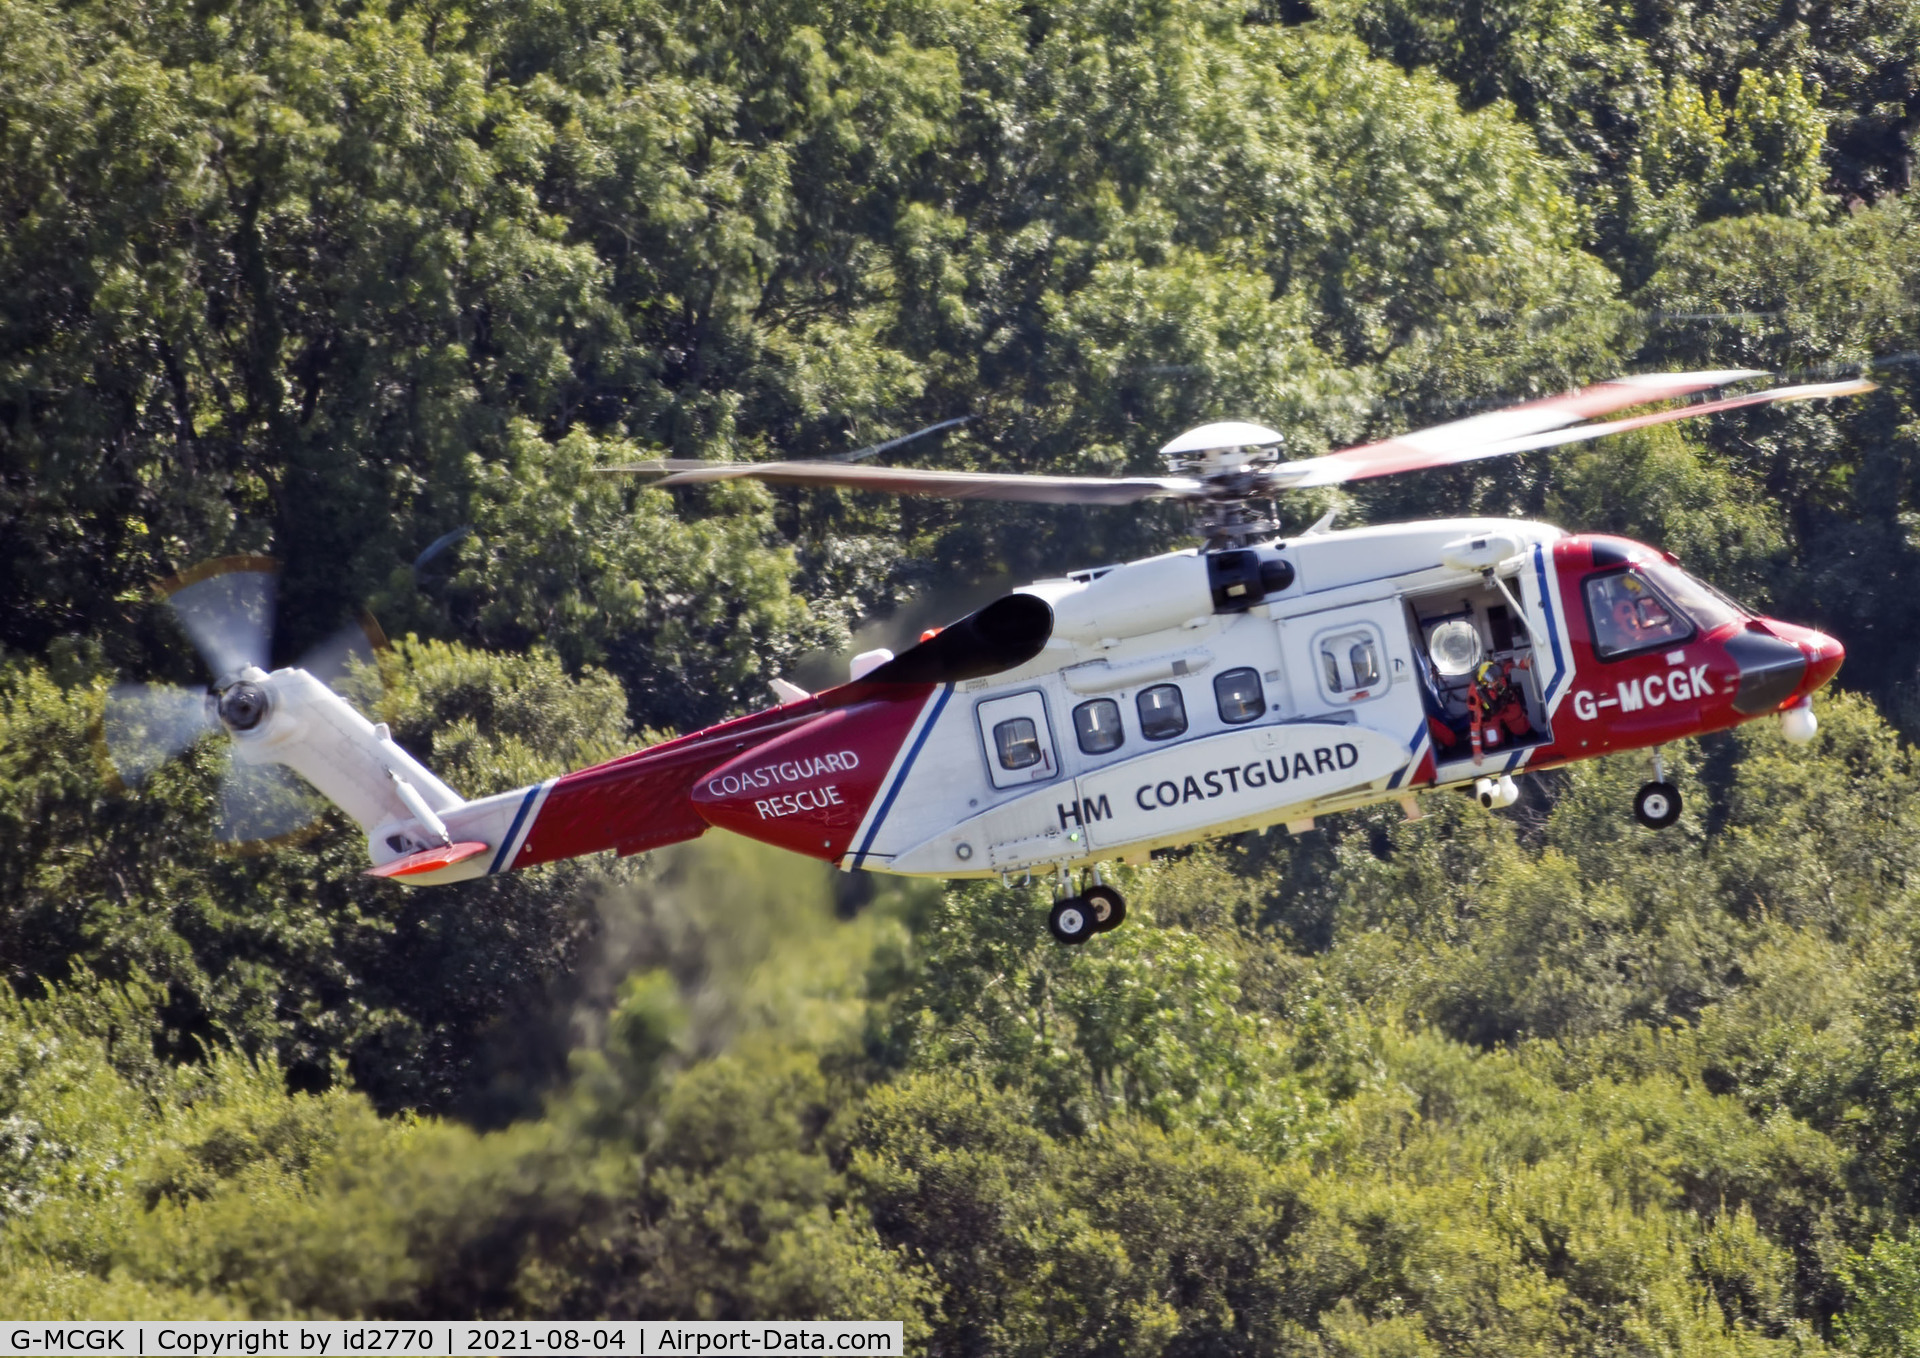 G-MCGK, 2014 Sikorsky S-92A C/N 920251, On approach to HLS